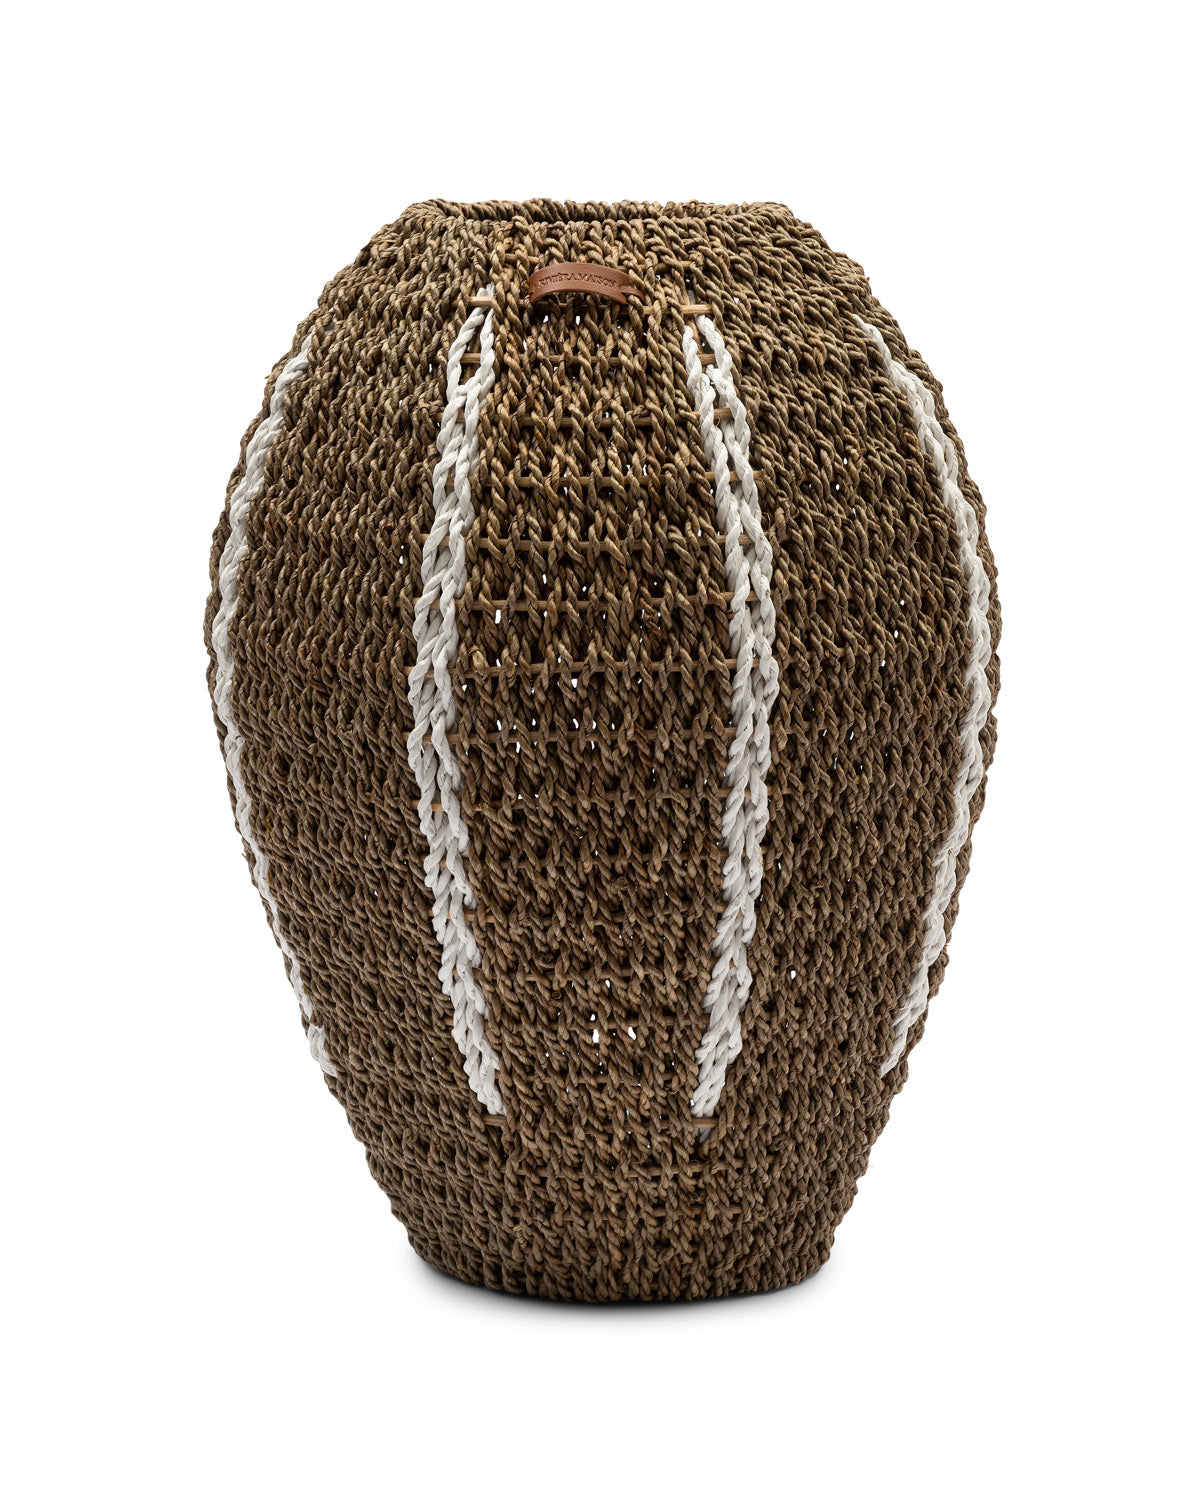 Woven Stripes Seagrass Vase by Riviera Maison